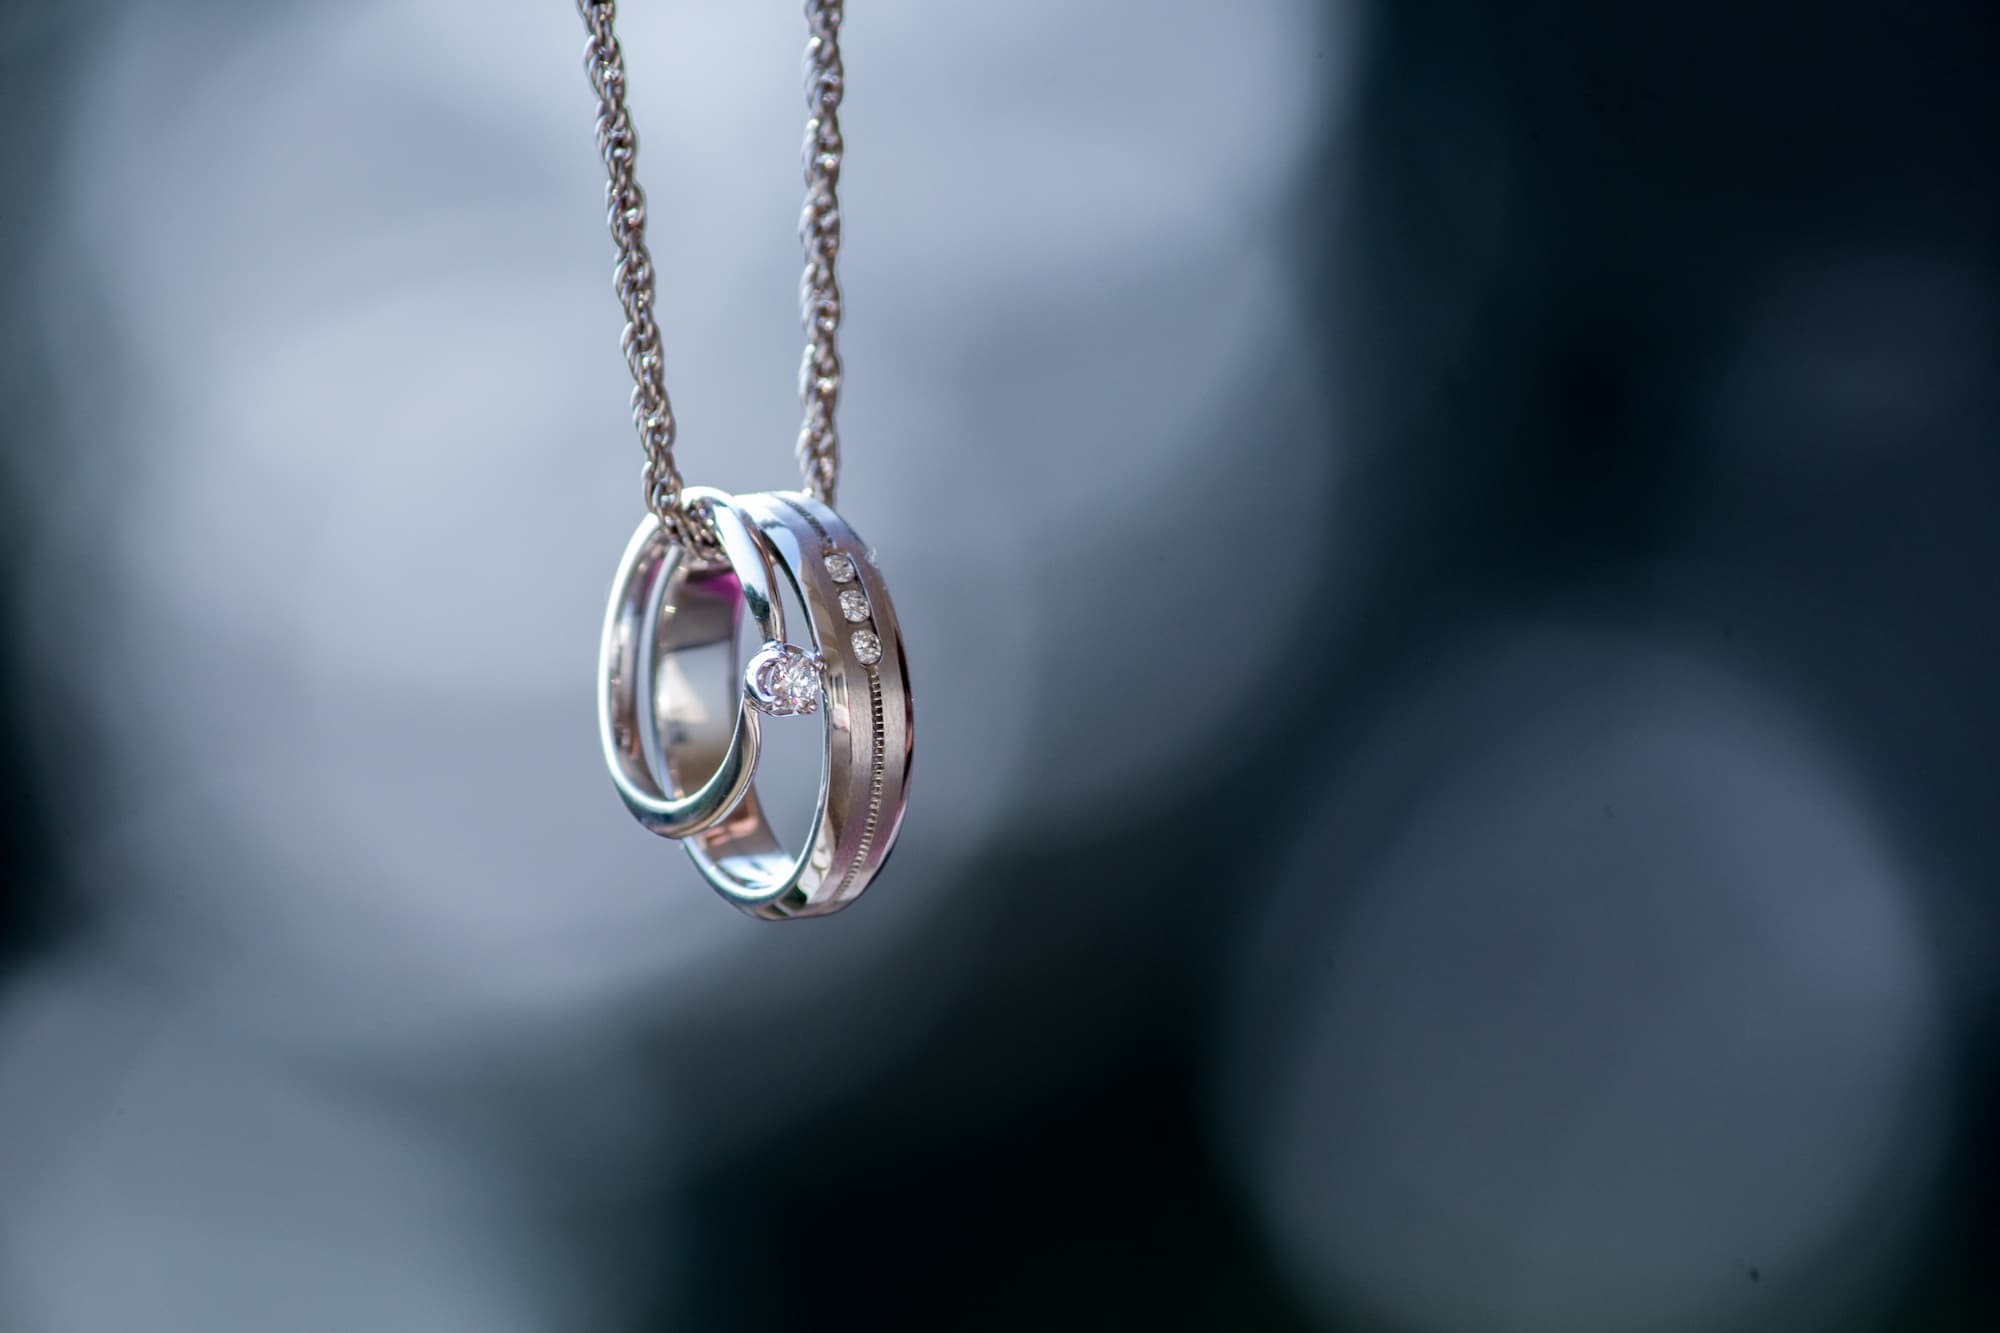 Engagement and wedding bands hanging from a silver chain against dark bokeh background.